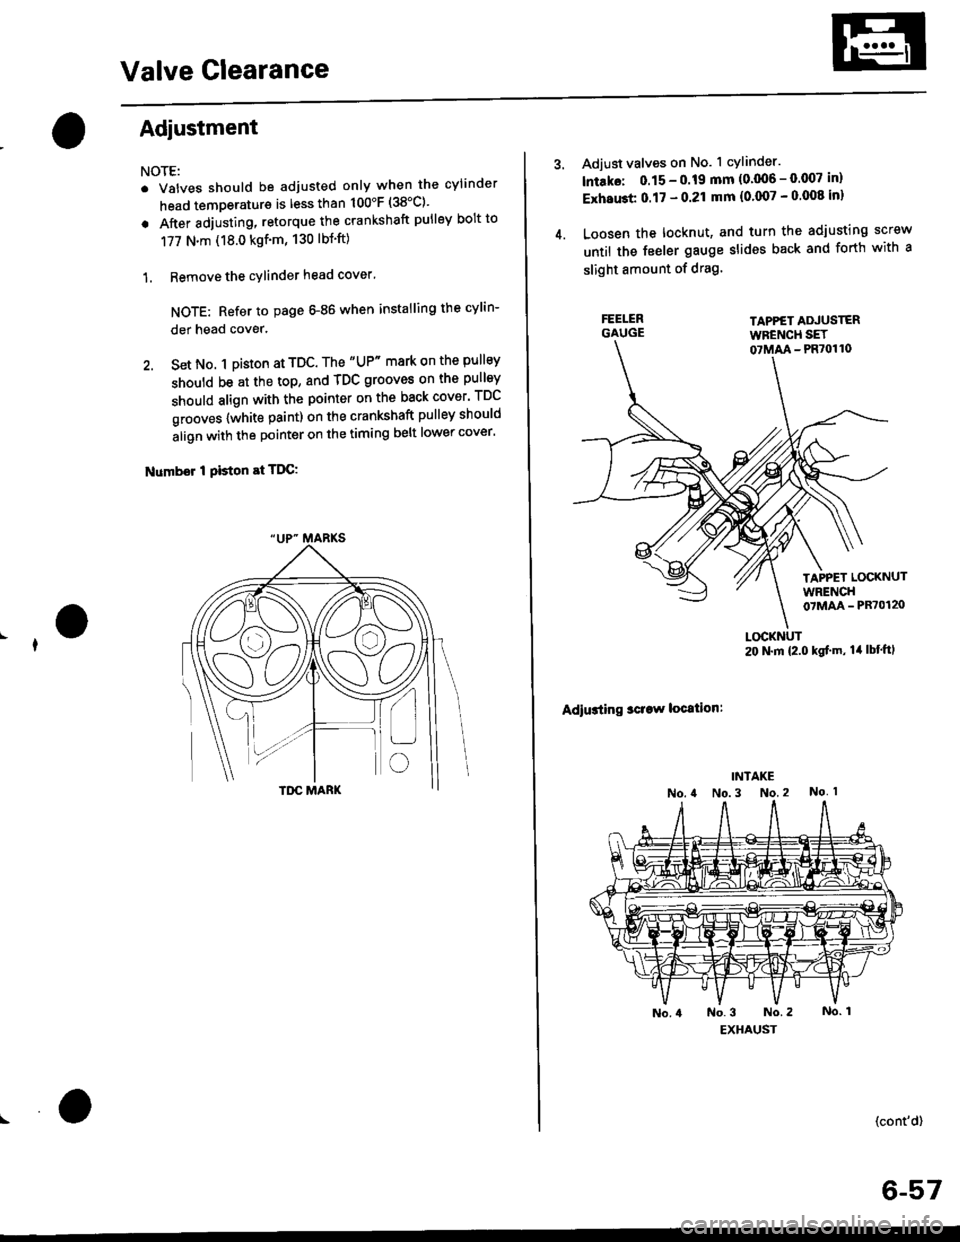 HONDA CIVIC 1998 6.G Owners Manual Valve Glearance
Adjustment
NOTE:
. Valves should be adjusted only when the cylinder
head temperaturs is less than 100F (38C)
. After adjusting, retorque the crankshaft pulley bolt to
177 N.m (18.0 